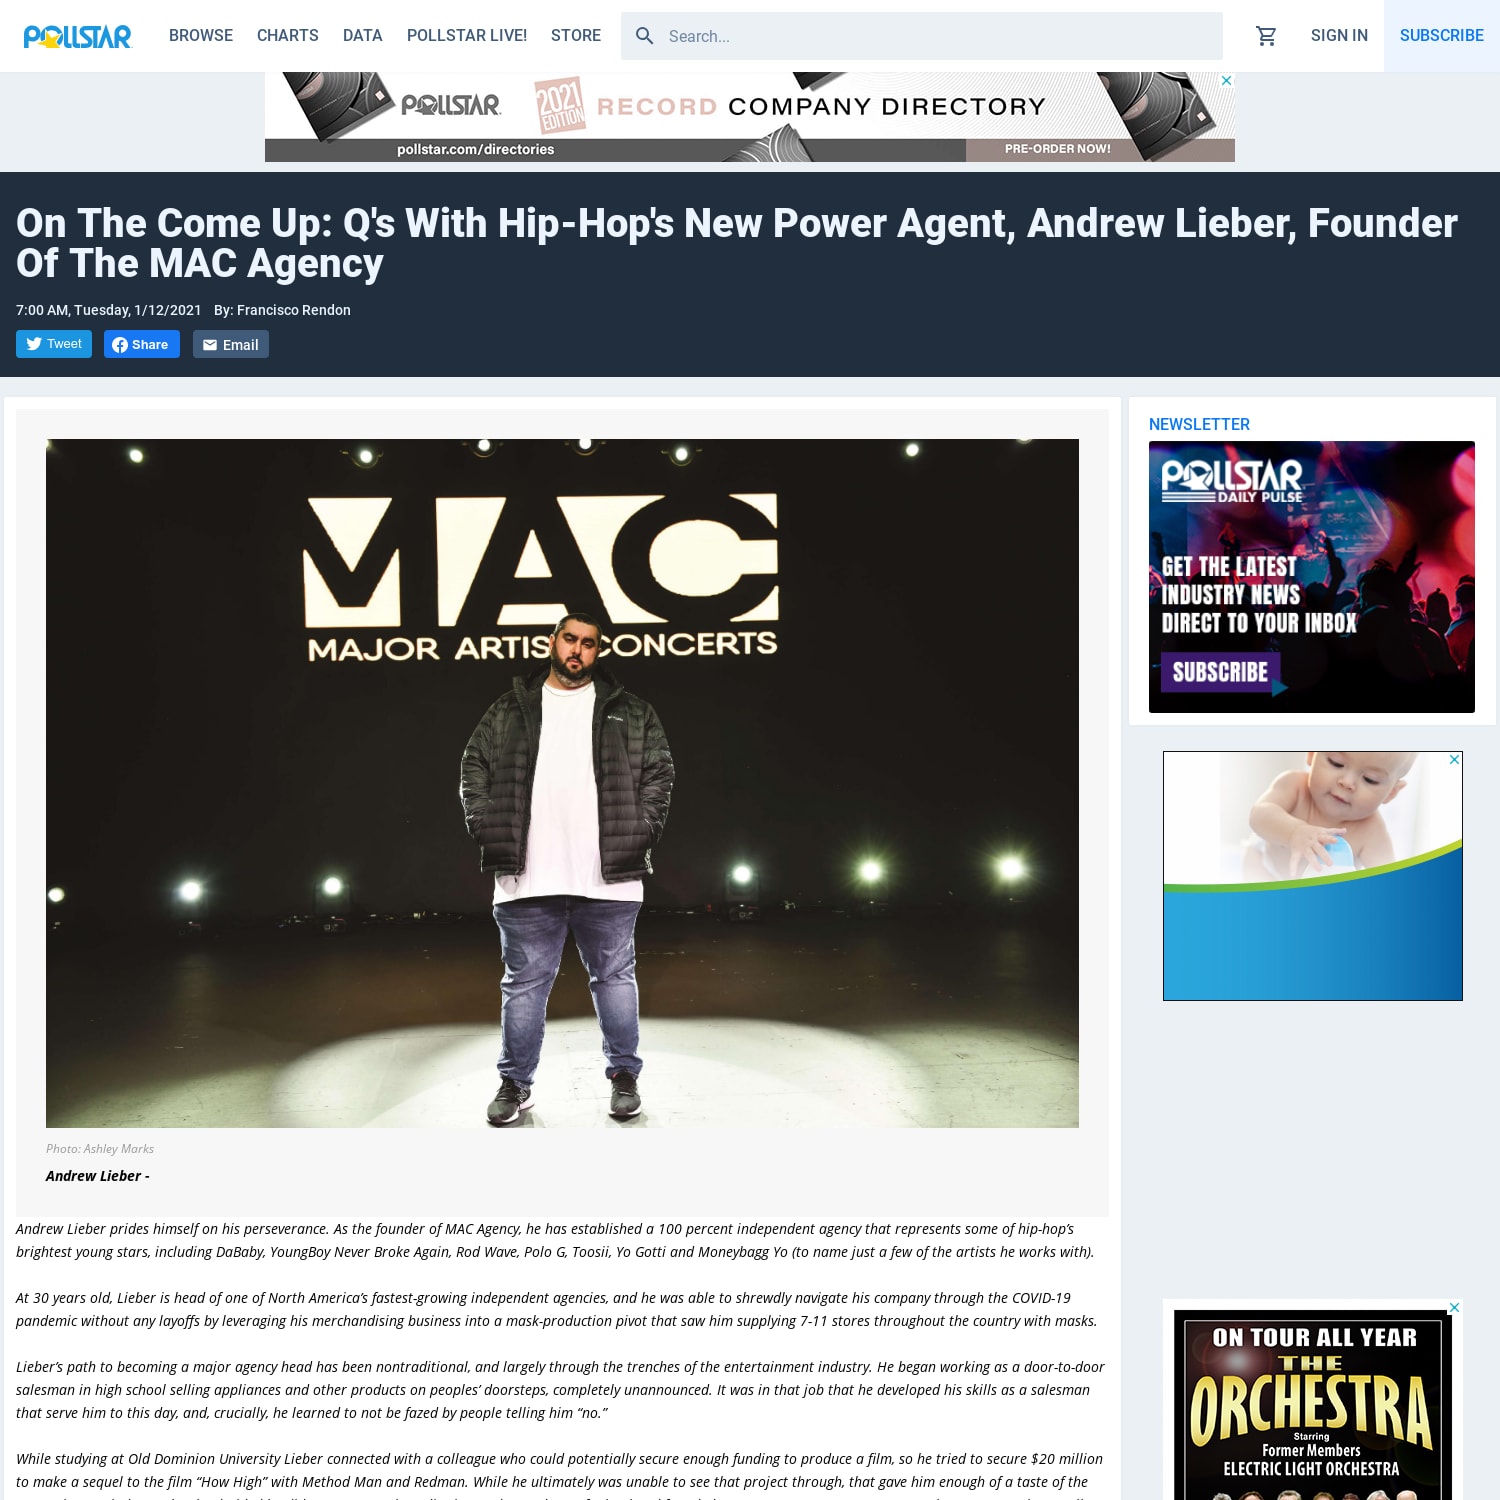 On The Come Up: Q's With Hip-Hop's New Power Agent, Andrew Lieber, Founder Of The MAC Agency